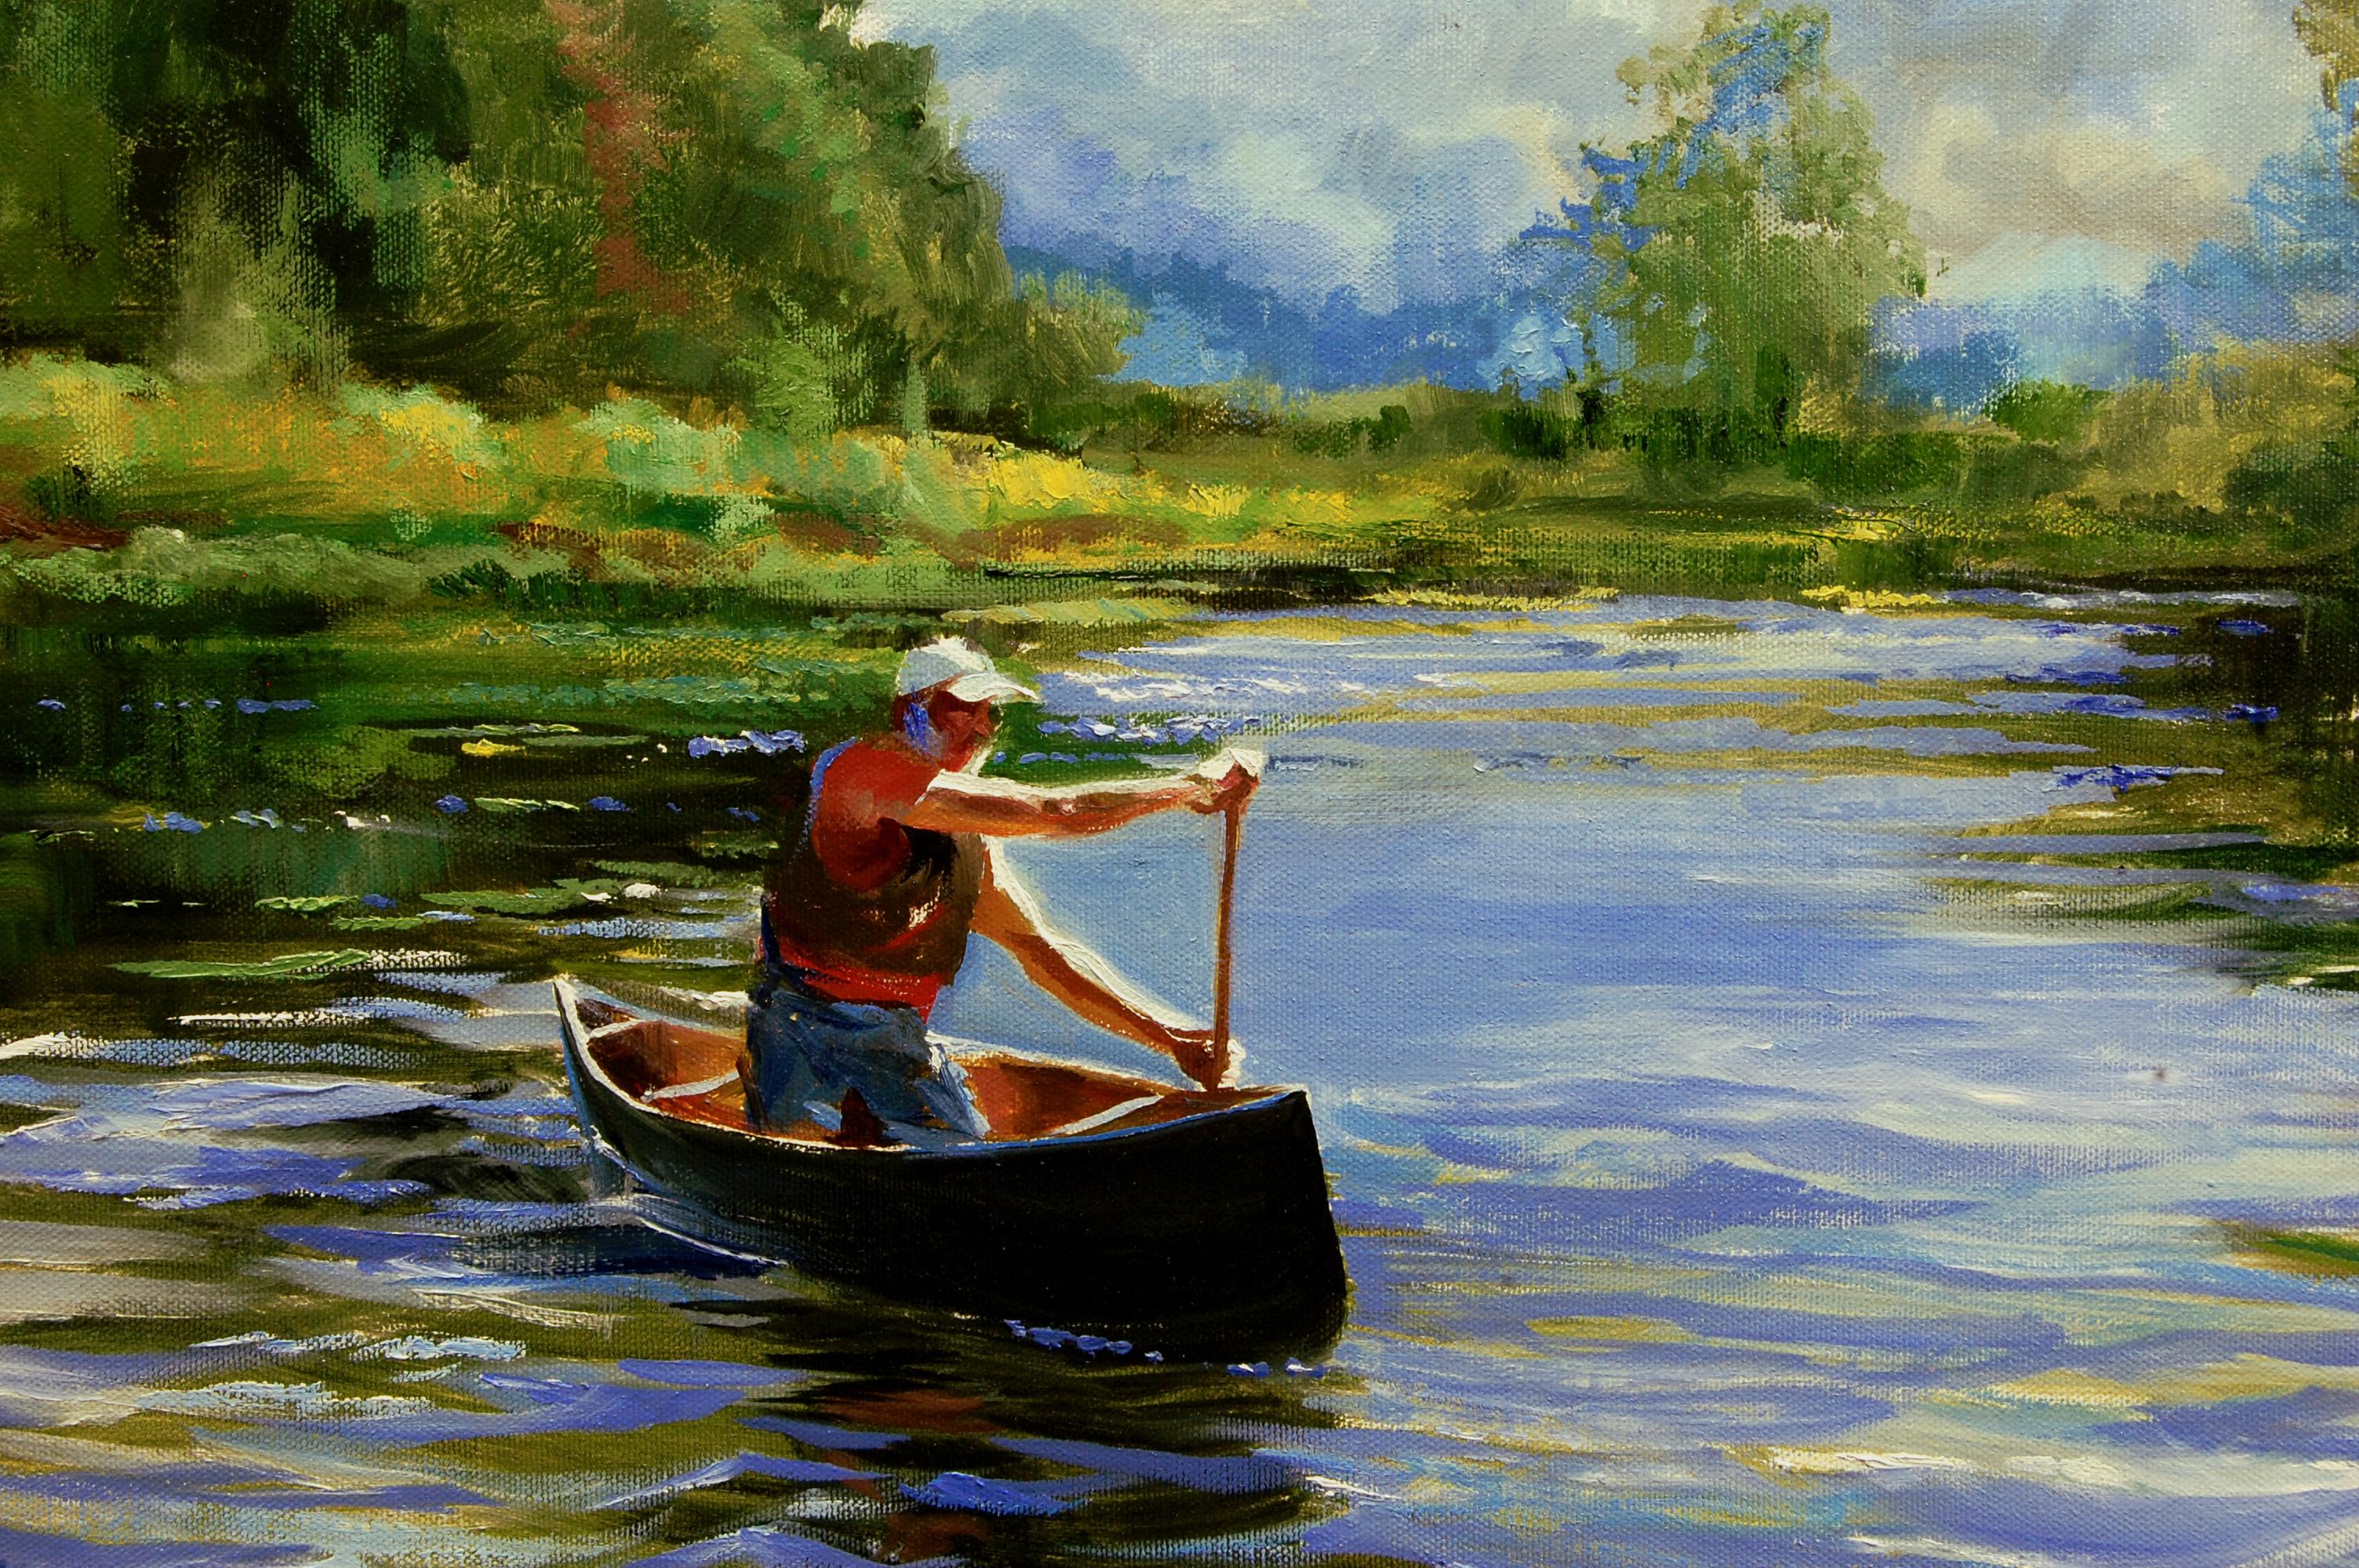 <p>Artist Comments<br>Artist Onelio Marrero presents a view of a canoeist traversing the New Jersey river as storm clouds brew in the distance. The piece embodies the adventure of canoeing - the shift of currents from placid to swift as the stream